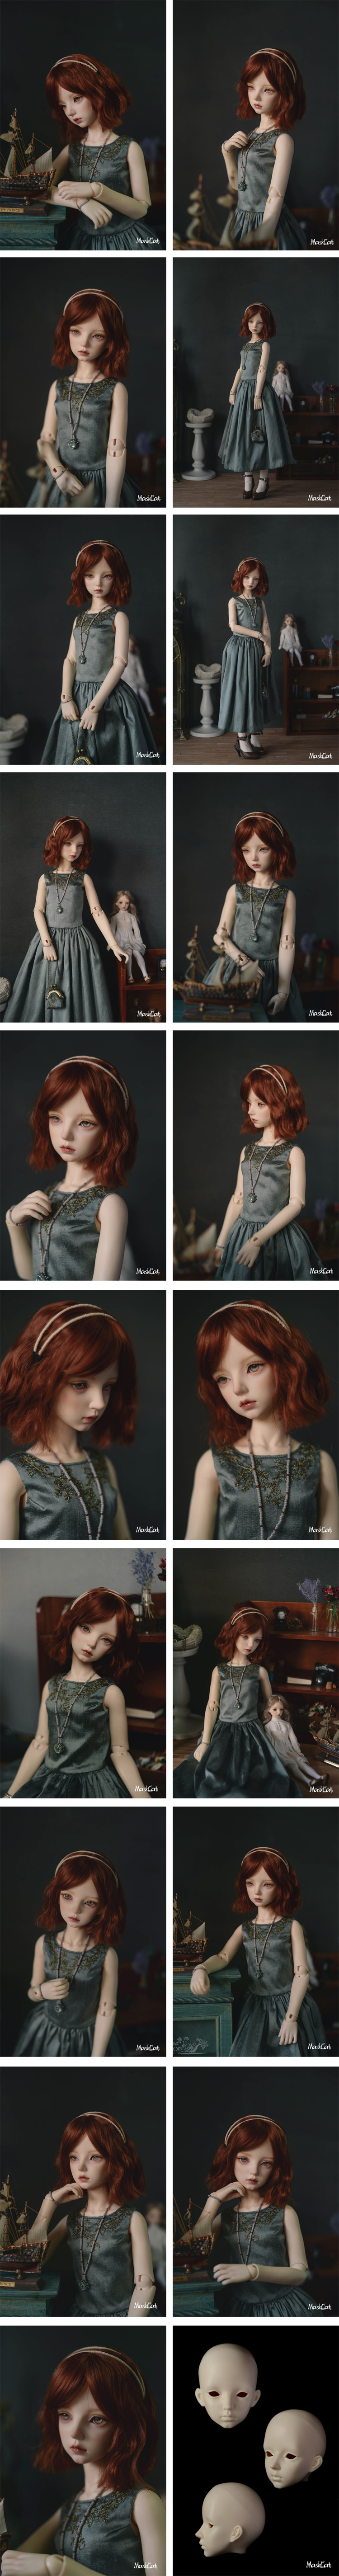 BJD Frances Ball Jointed Doll